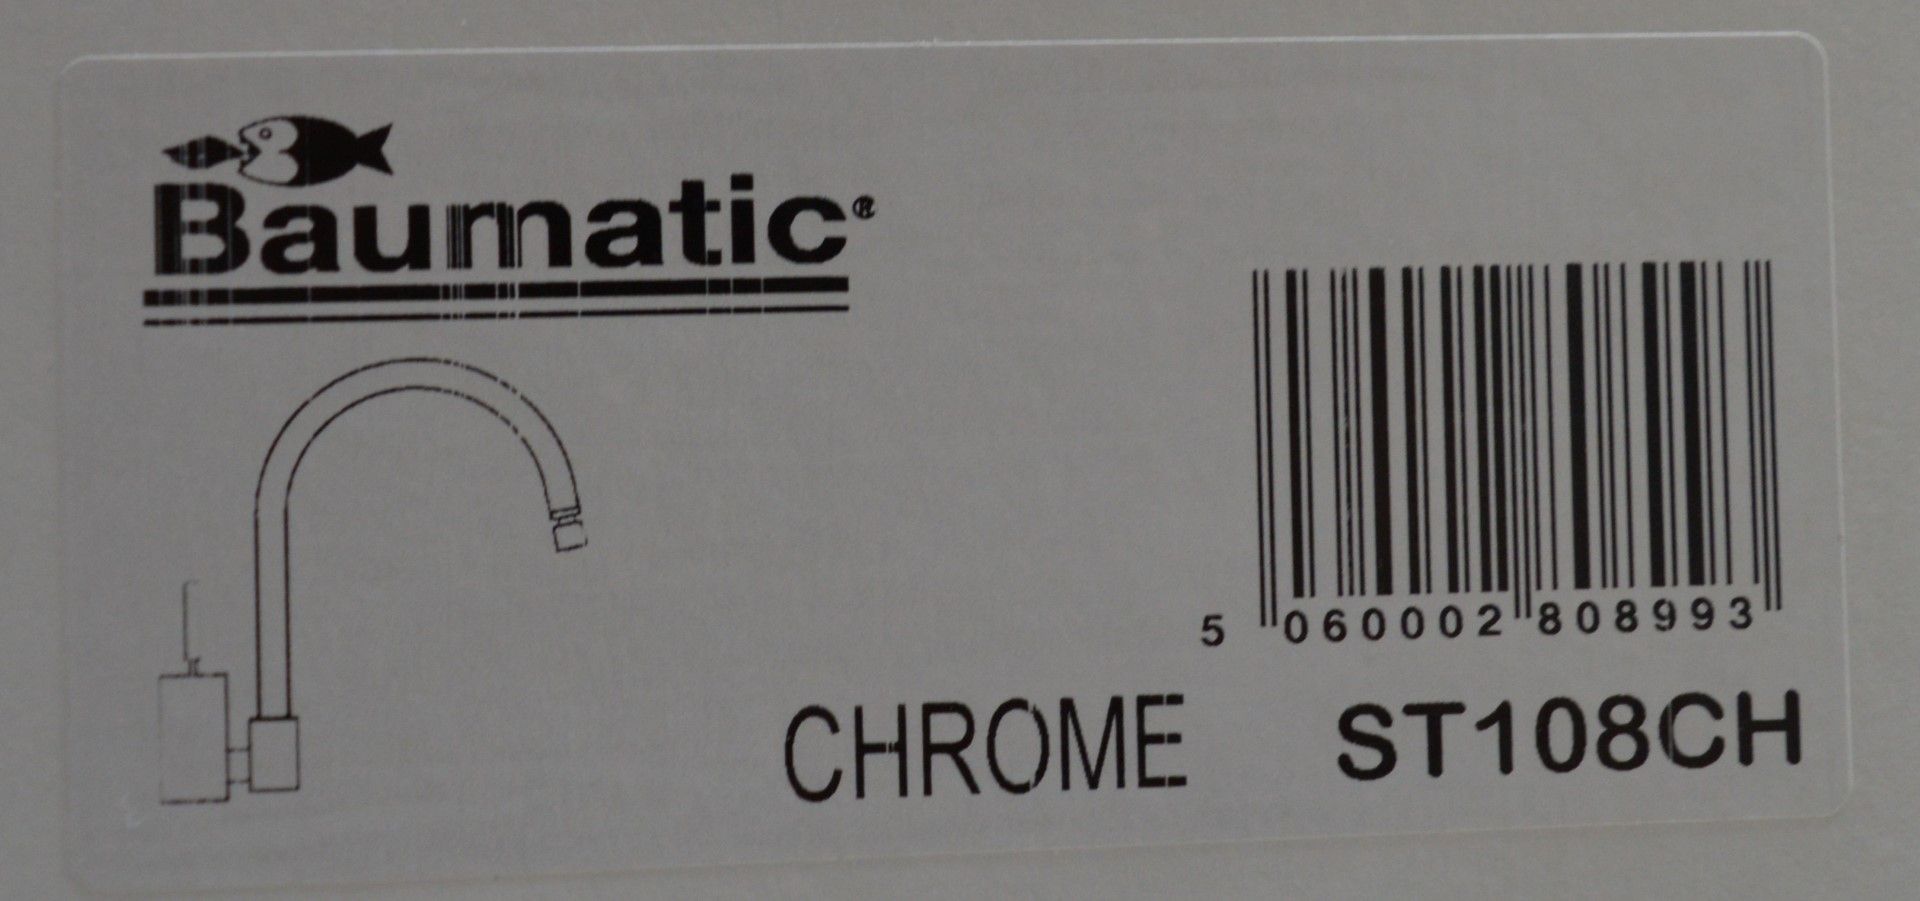 1 x Baumatic ST108CH Avalon Mixer Tap in Chrome – NEW & BOXED – CL053 – Location: Altrincham - Image 5 of 6